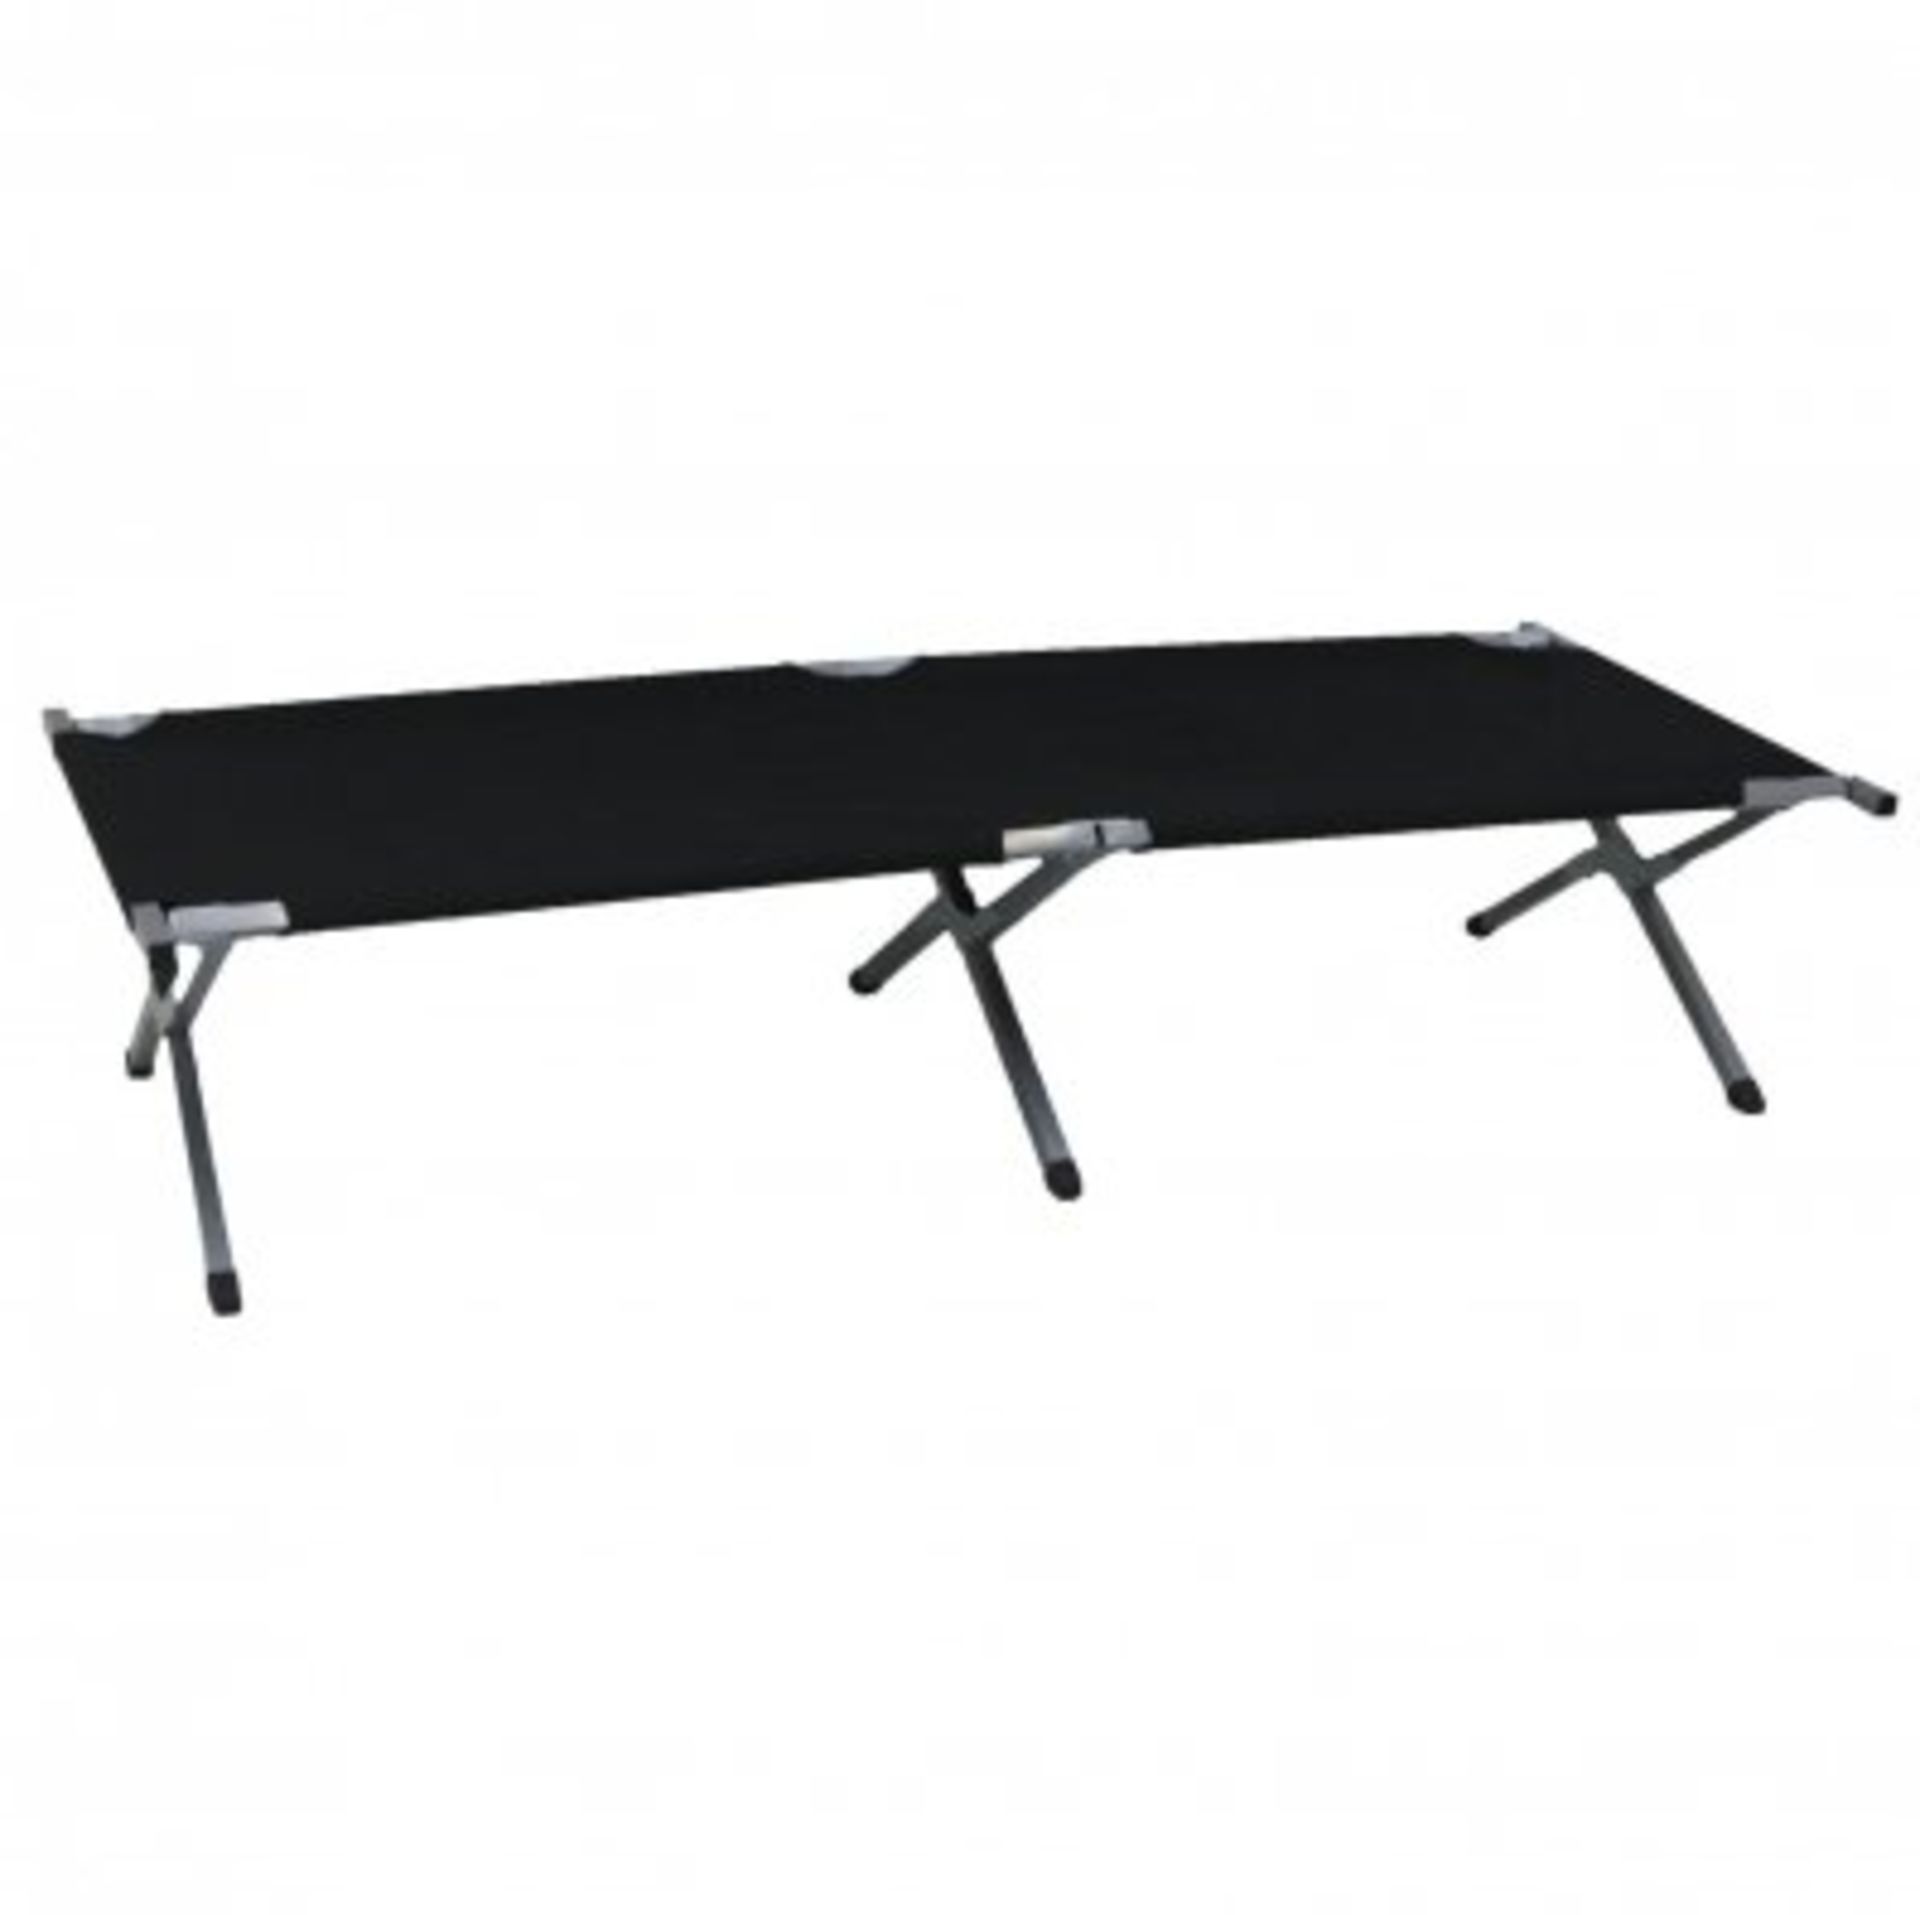 (TD78) Heavy Duty Outdoor Folding Camping Bed Portable with Carry Bag The folding bed is perfec...